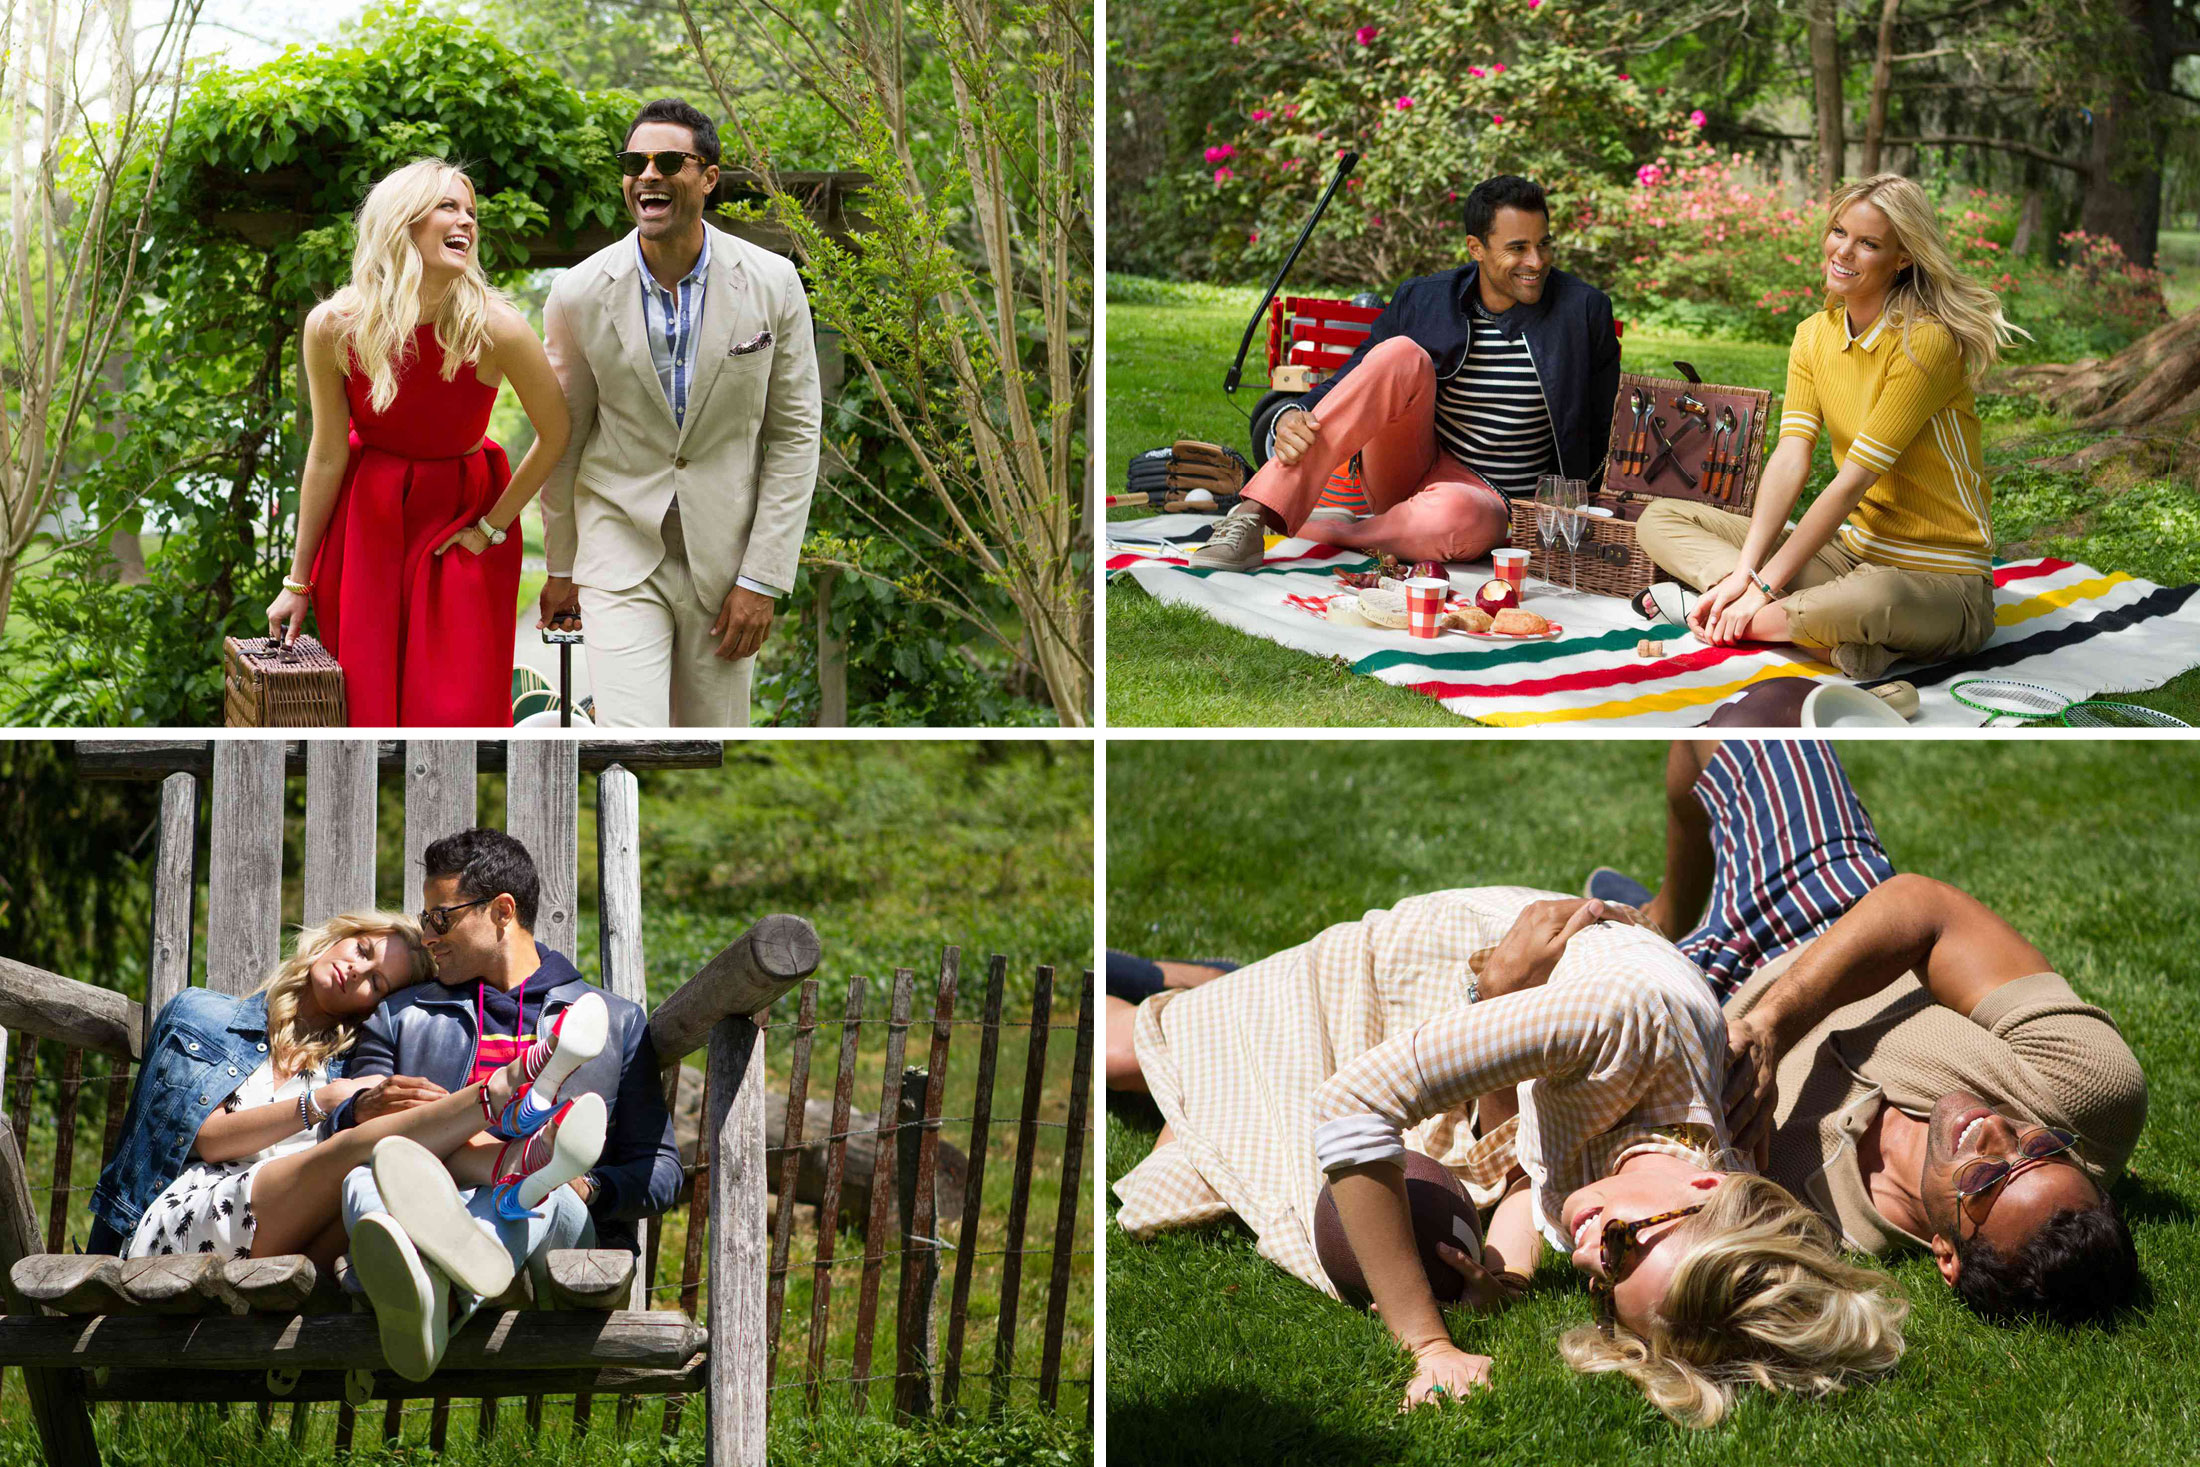  The Summer Fashion Guide: What to Wear for Outdoor Occasions   Produced / Photographed stills    BLOOMBERG.COM &nbsp;| 2015 